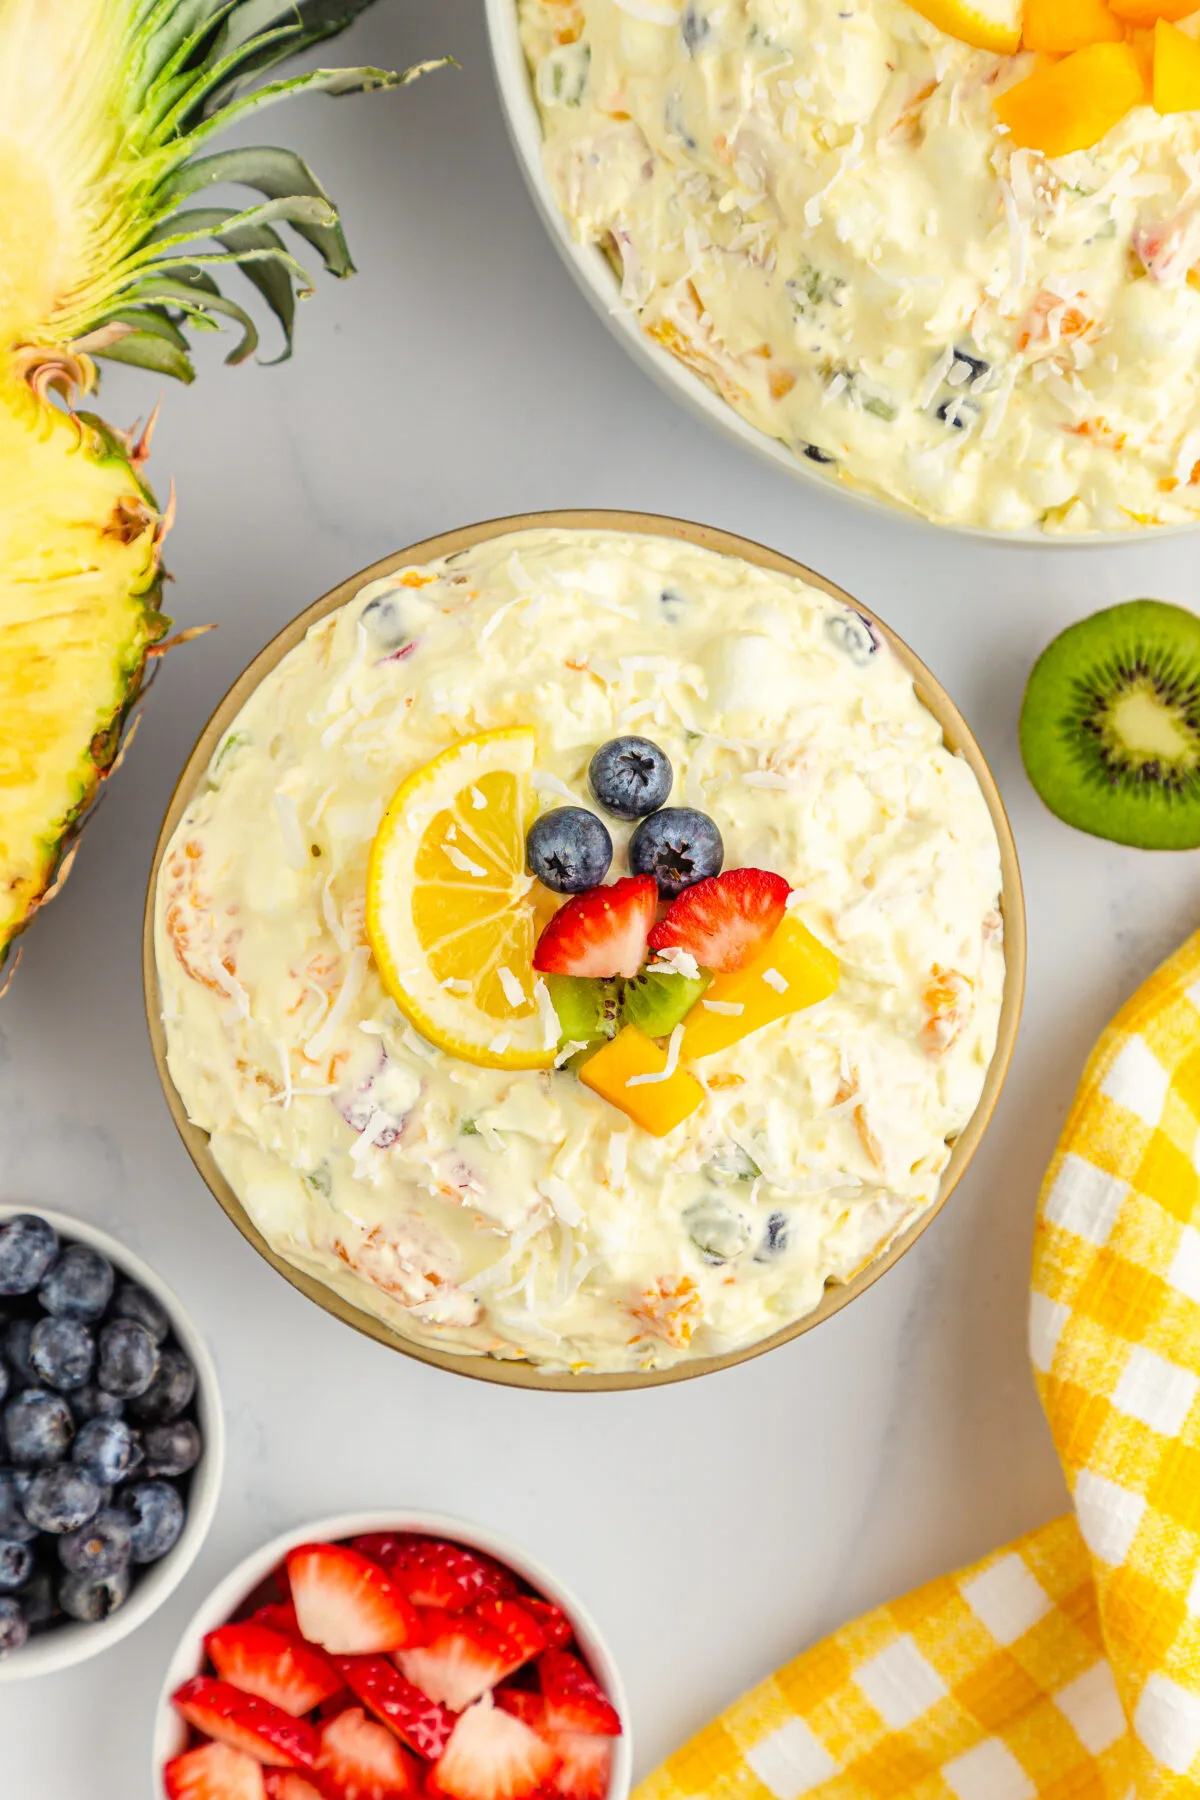 Packed full of island flavours, our easy tropical fruit fluff salad recipe is a perfect dessert or side dish for any occasion!